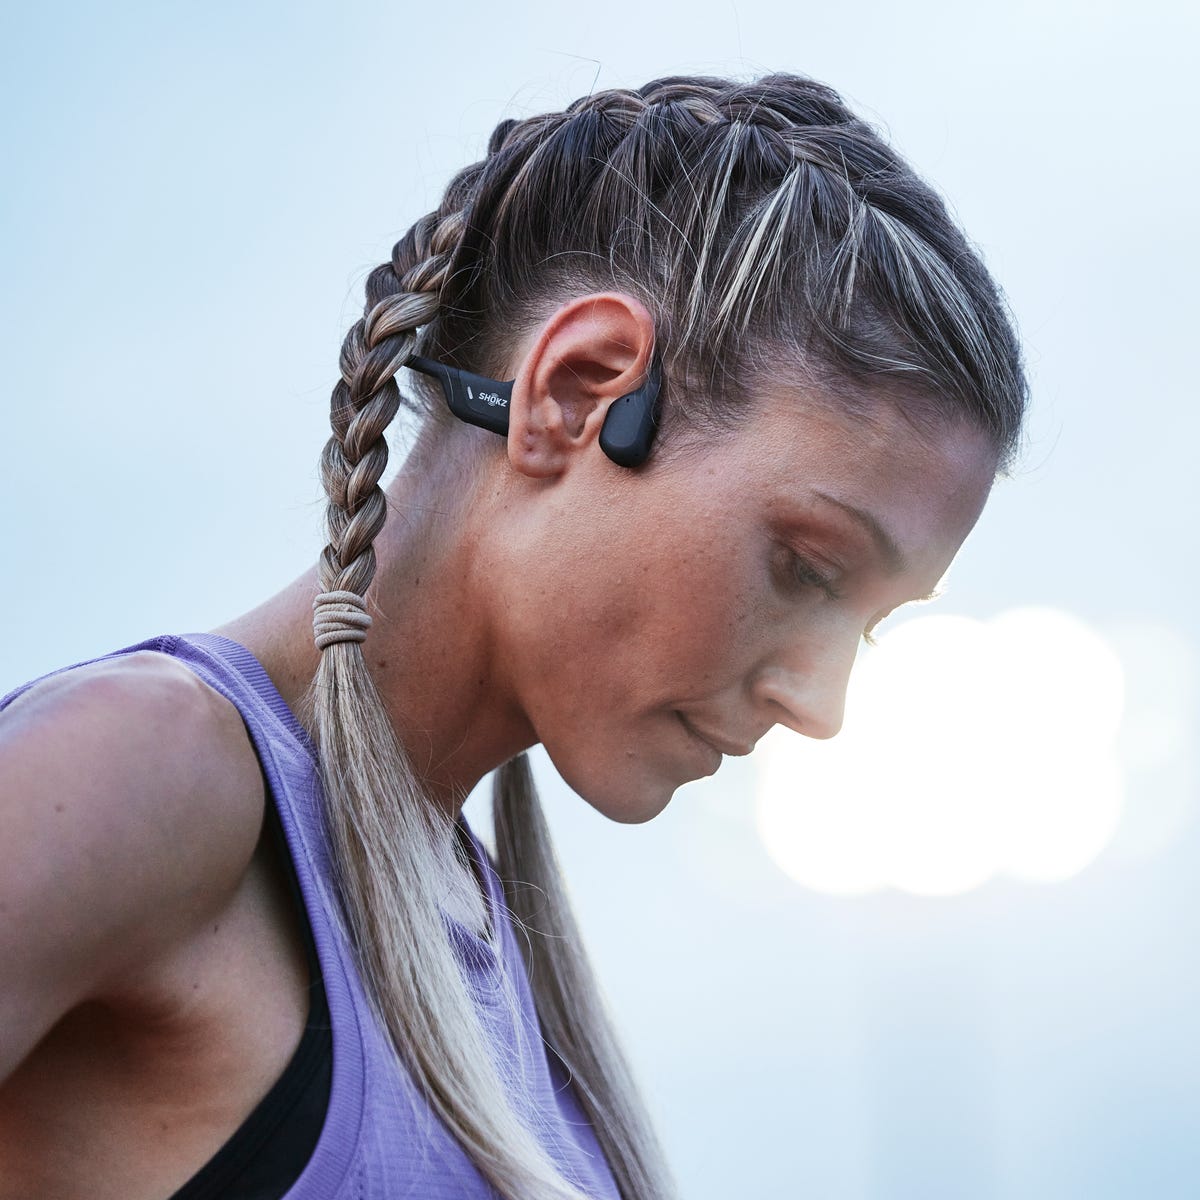 Best Earbuds for Running 2023: Bone and CNET